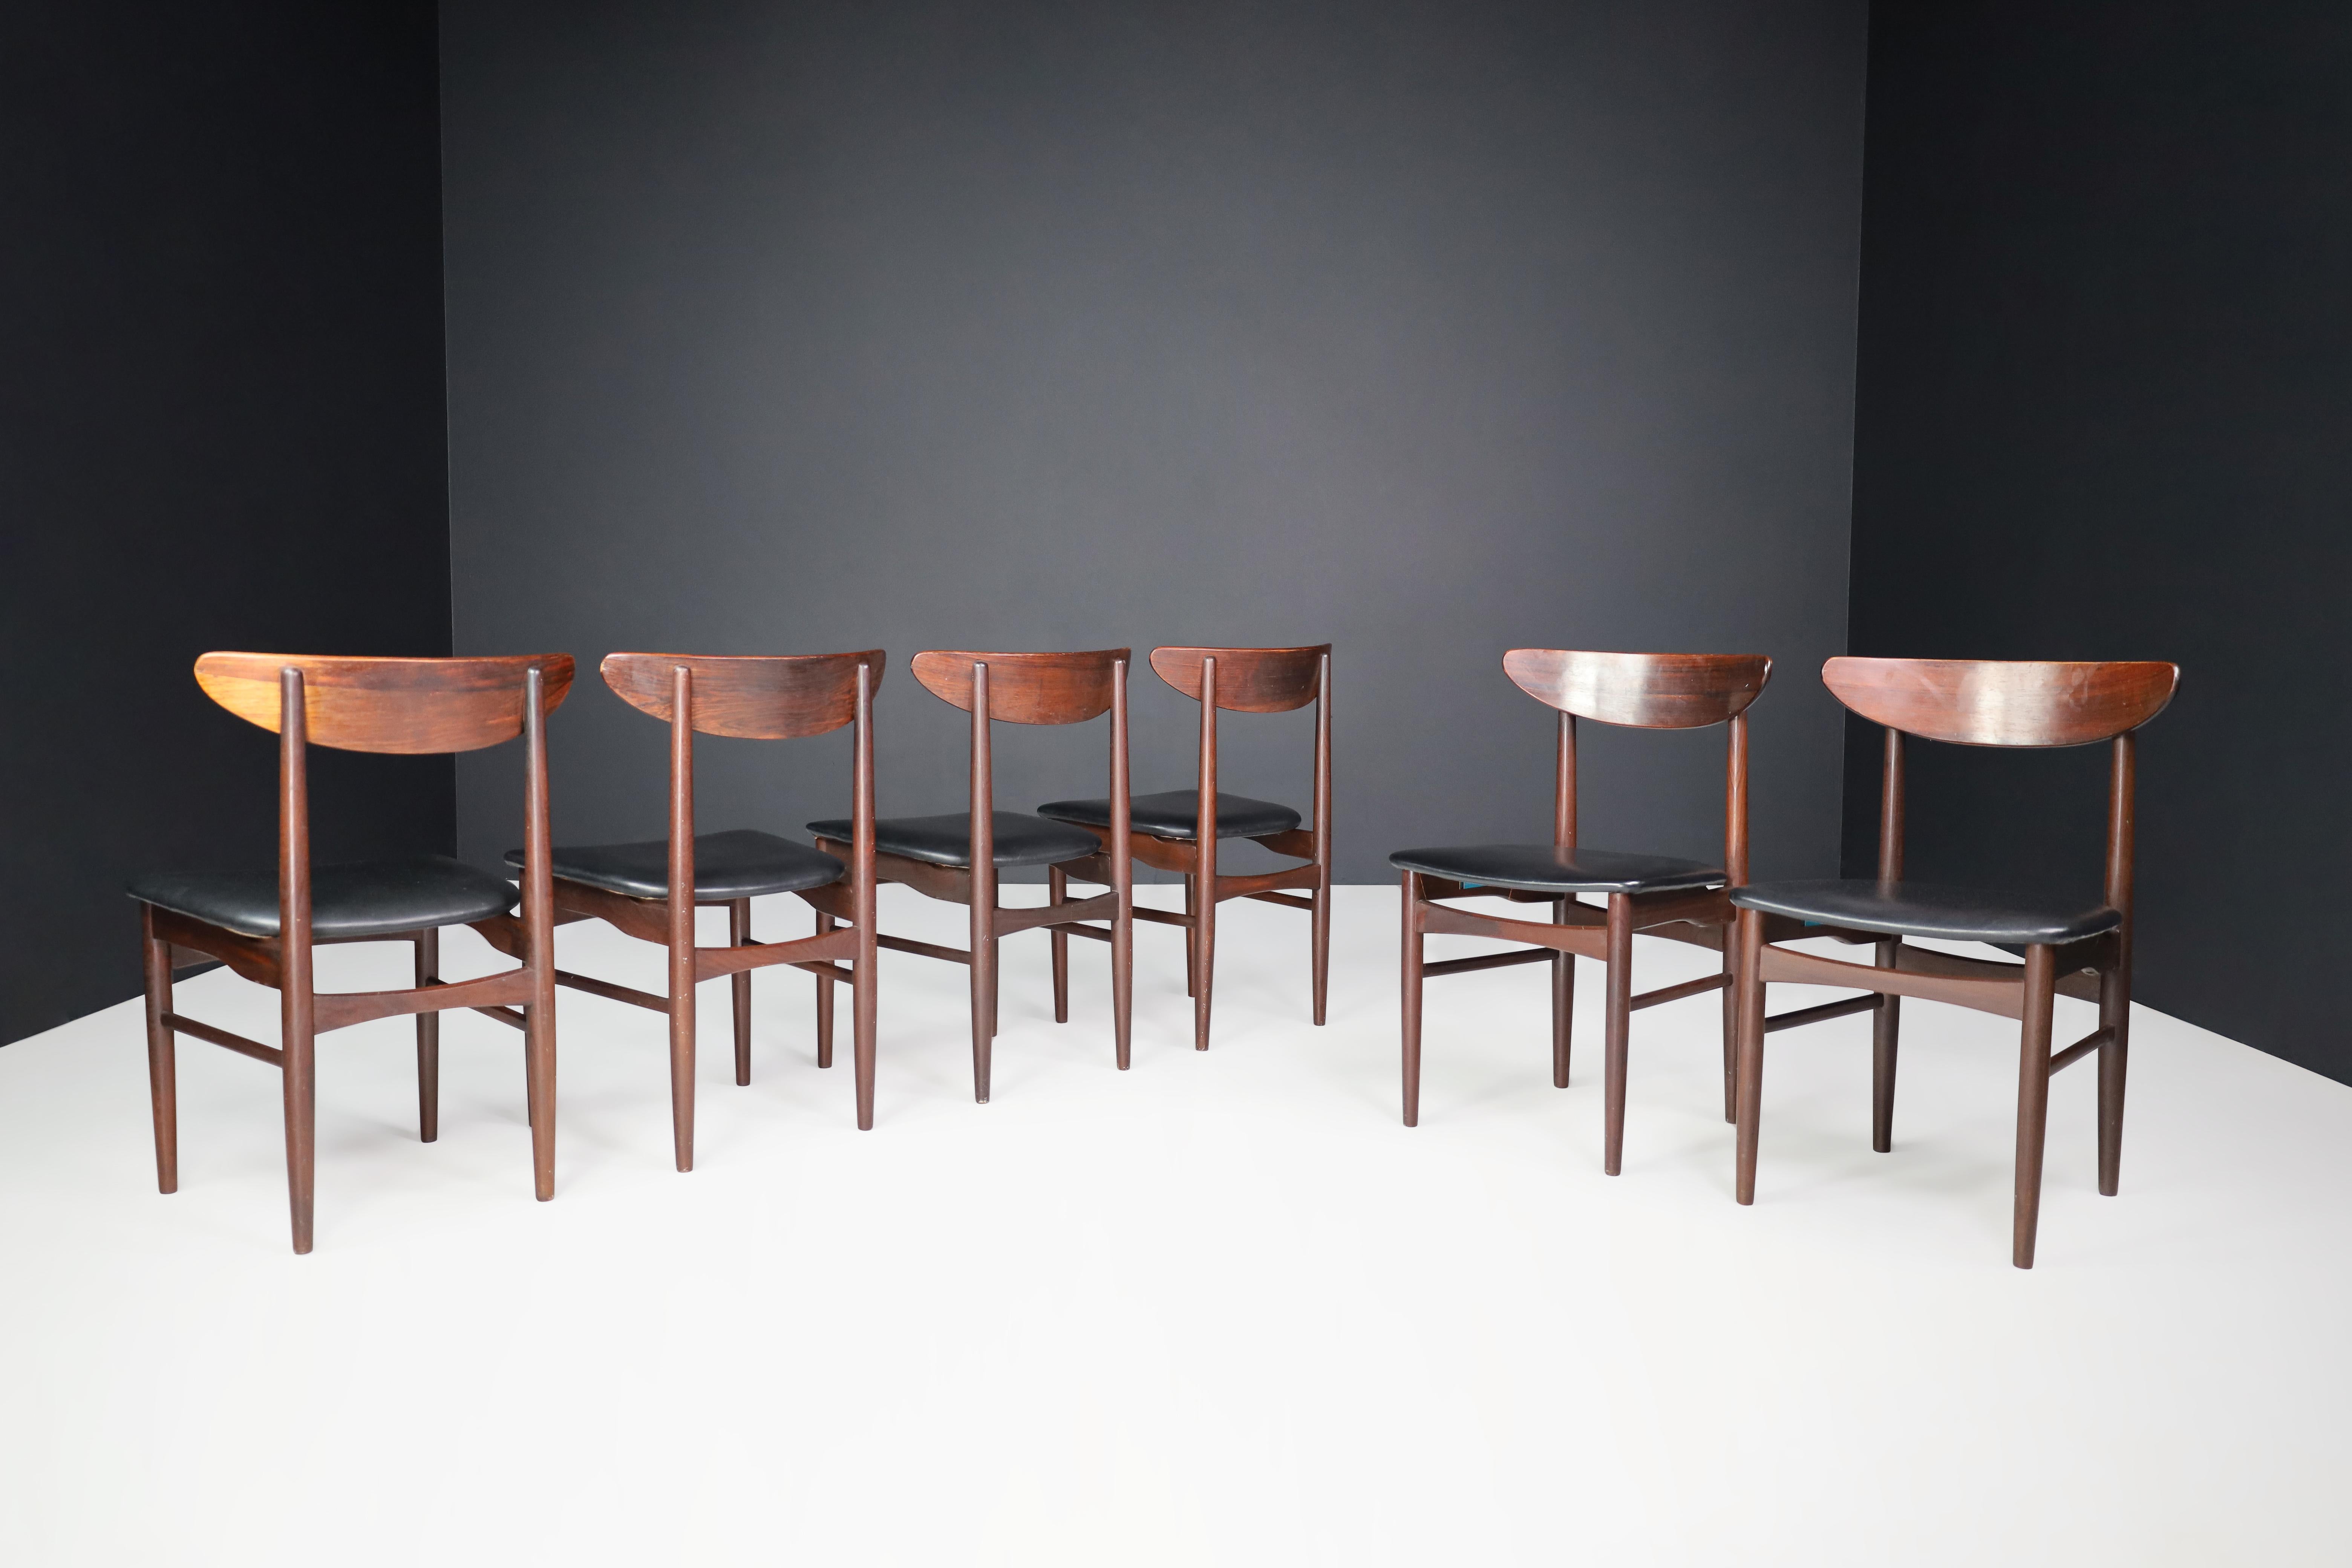 Dyrlund Hardwood and Black Leather Dining Chairs, Denmark, 1960s For Sale 3